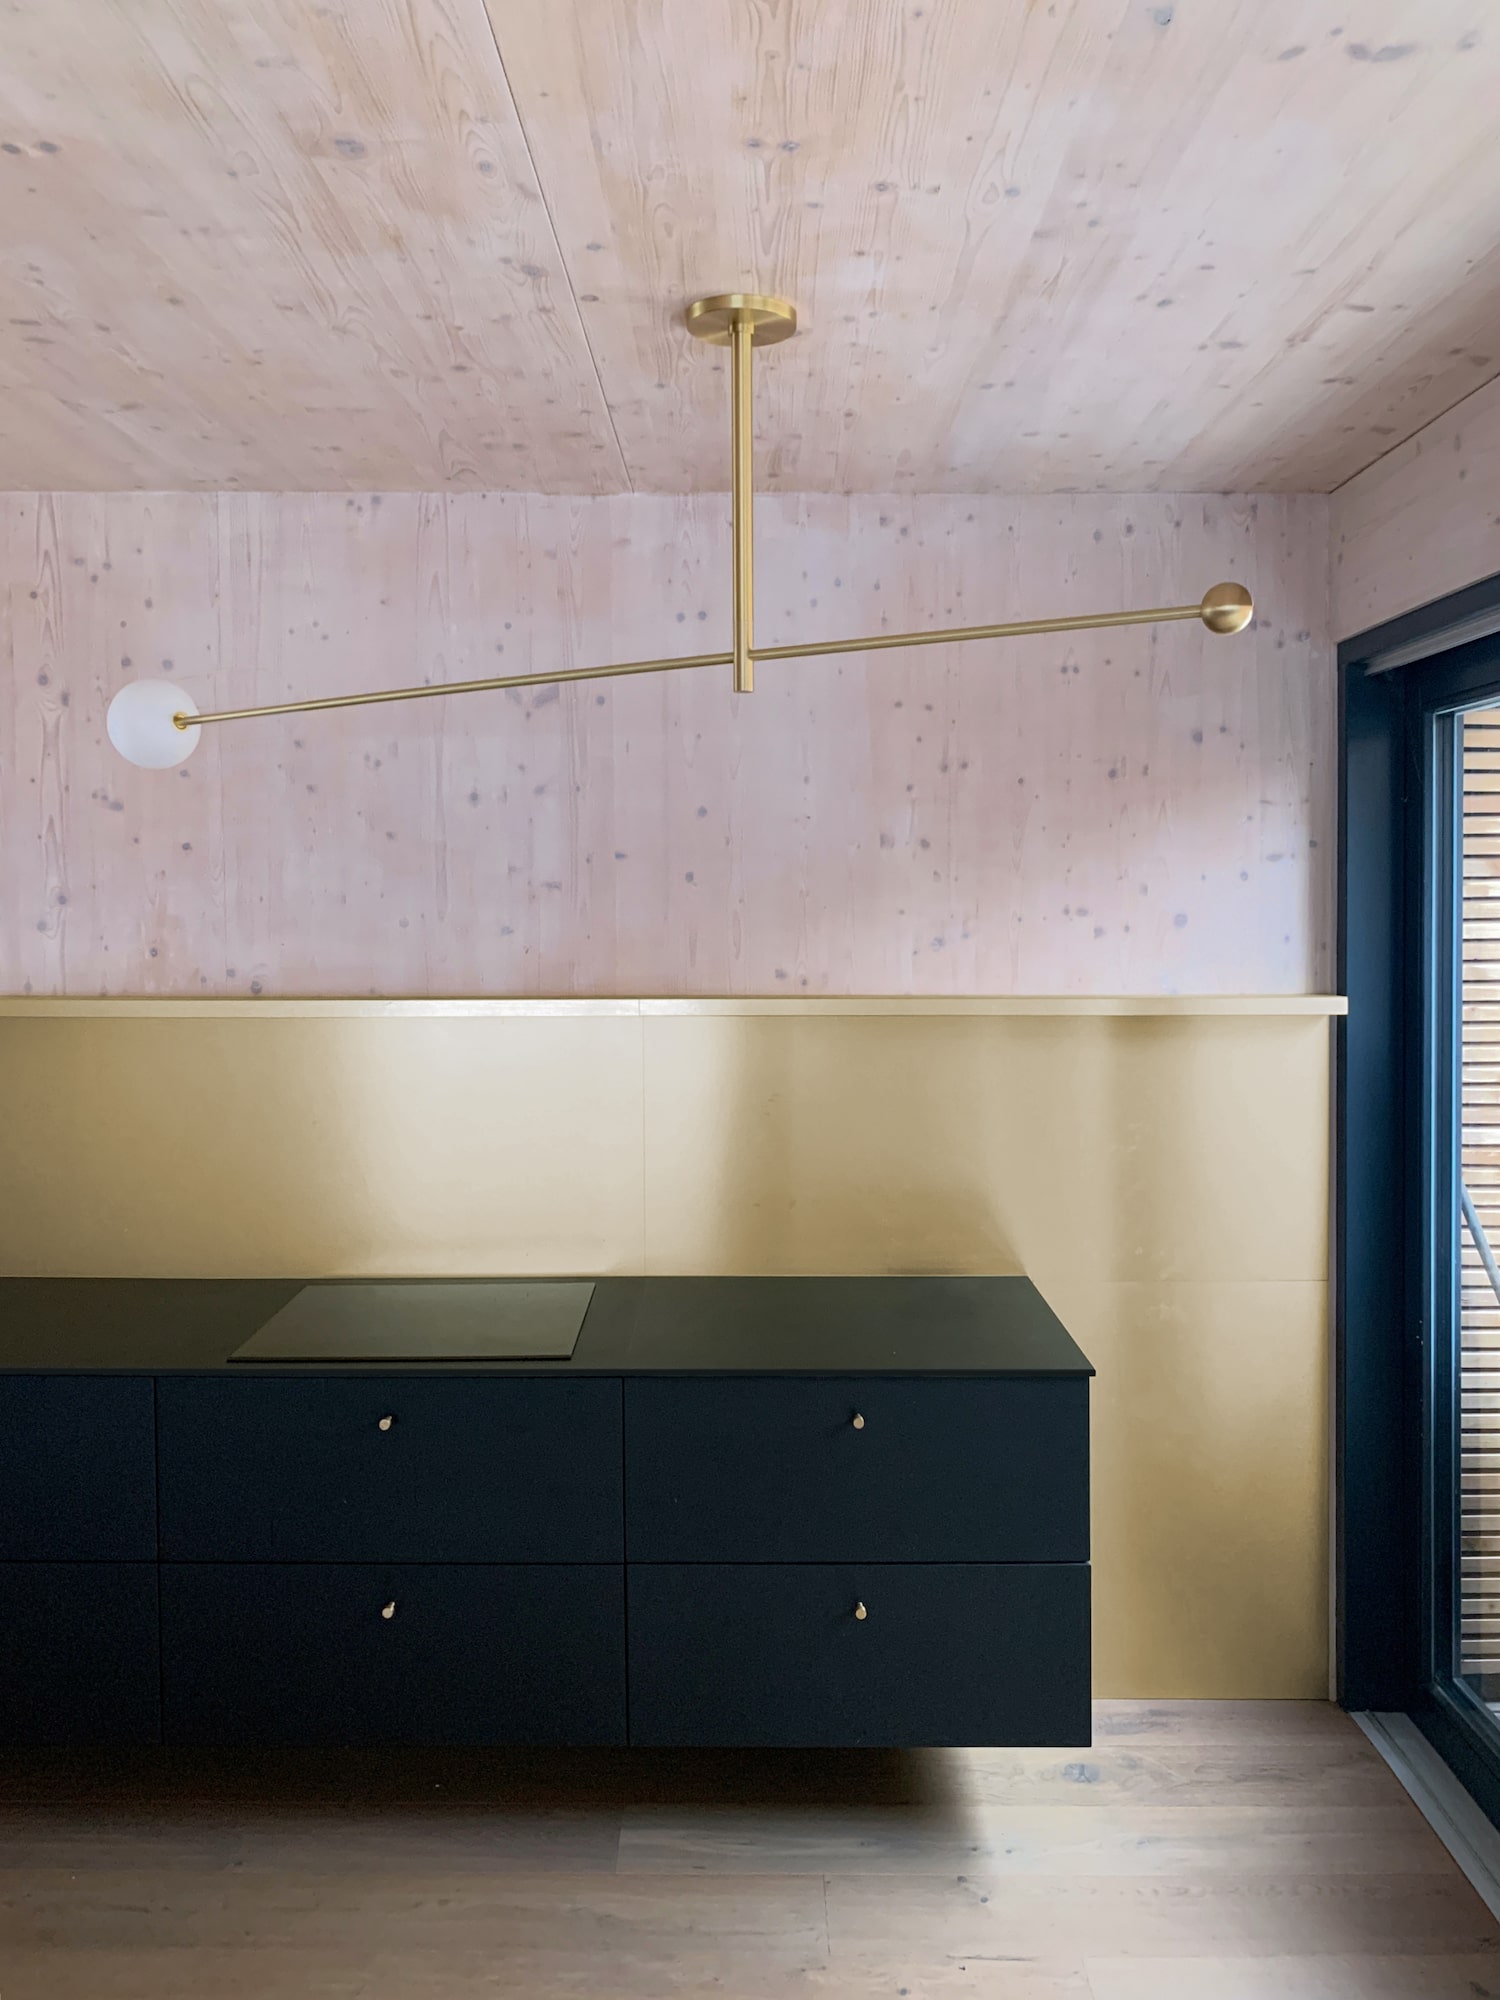 Solitary Rotatable Luna Orbit Kinetic Luminaire Made out of Brass and Steel in Interior